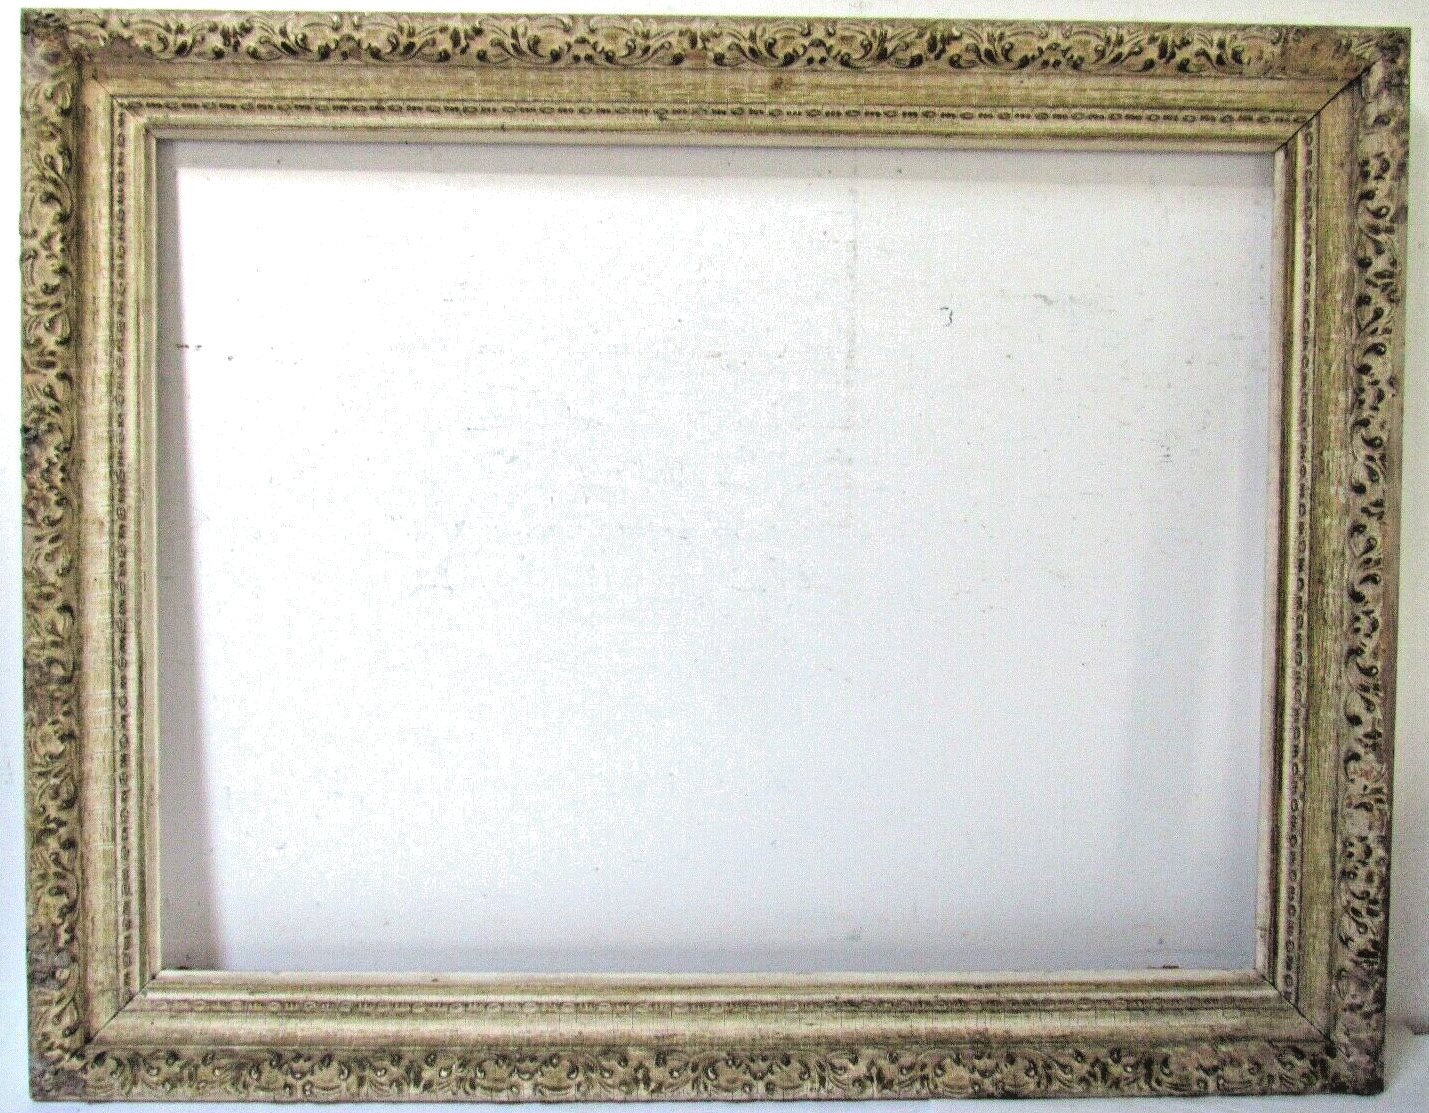 VINTAG WHITEWASH  FRAME FOR PAINTING  24  x 18 INCH  (d-100)